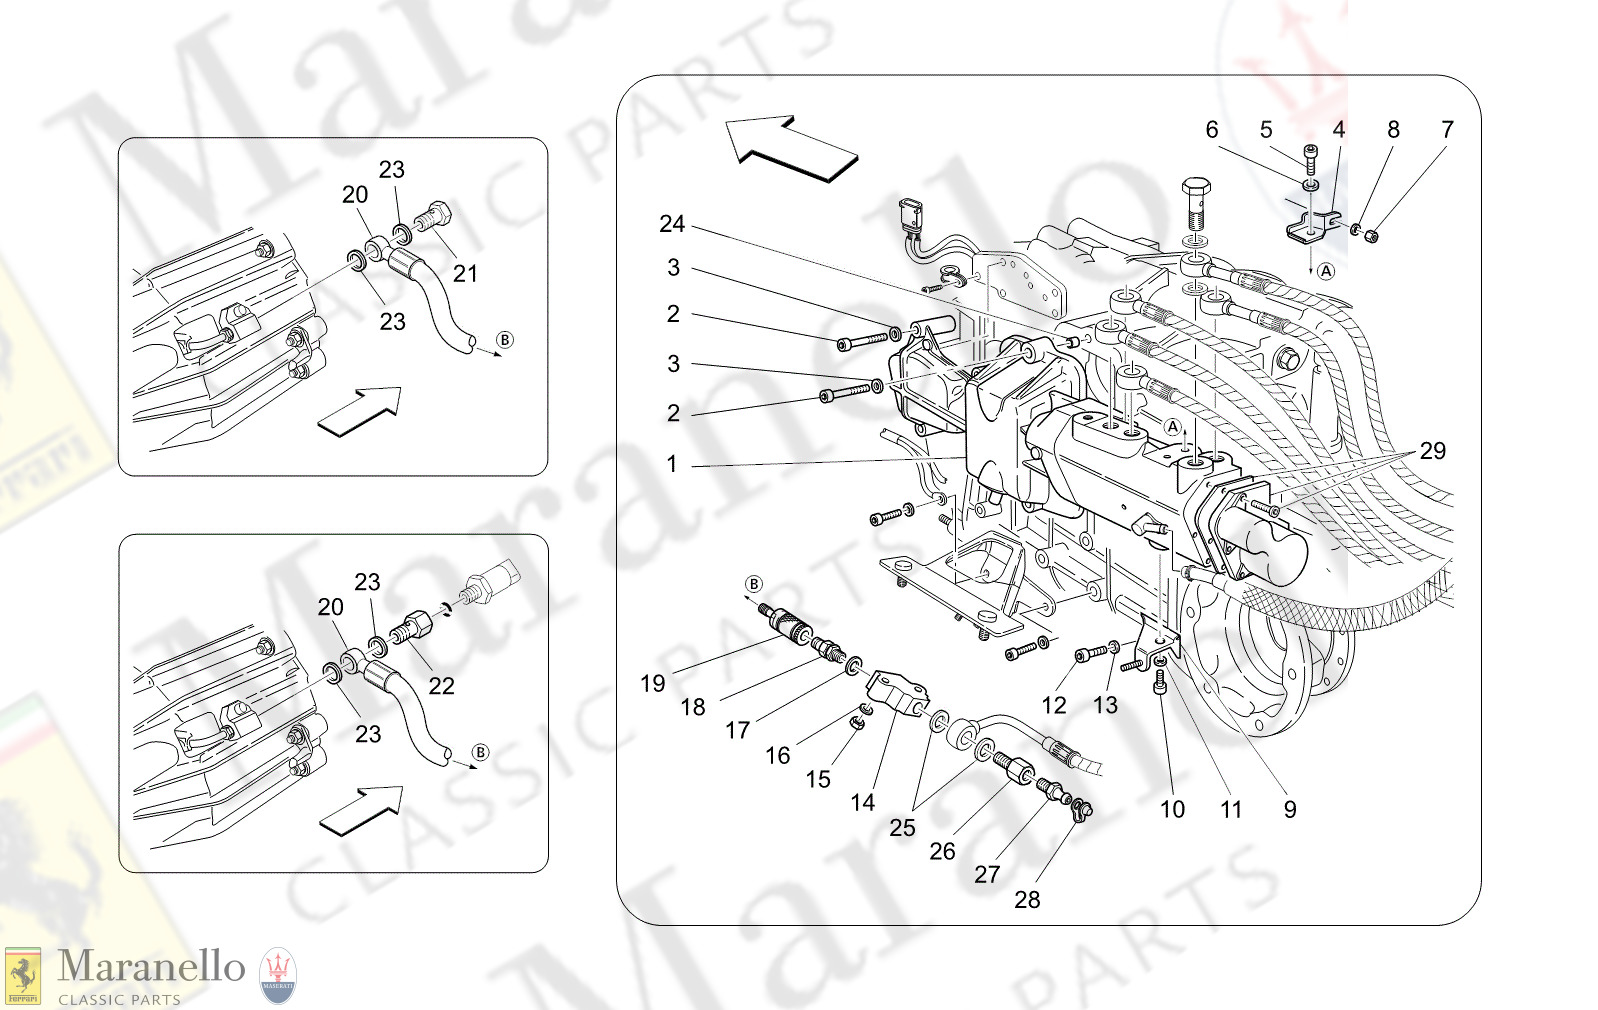 02.01 - 1 - 0201 - 1 Actuation Hydraulic Parts For F1 Gearbox